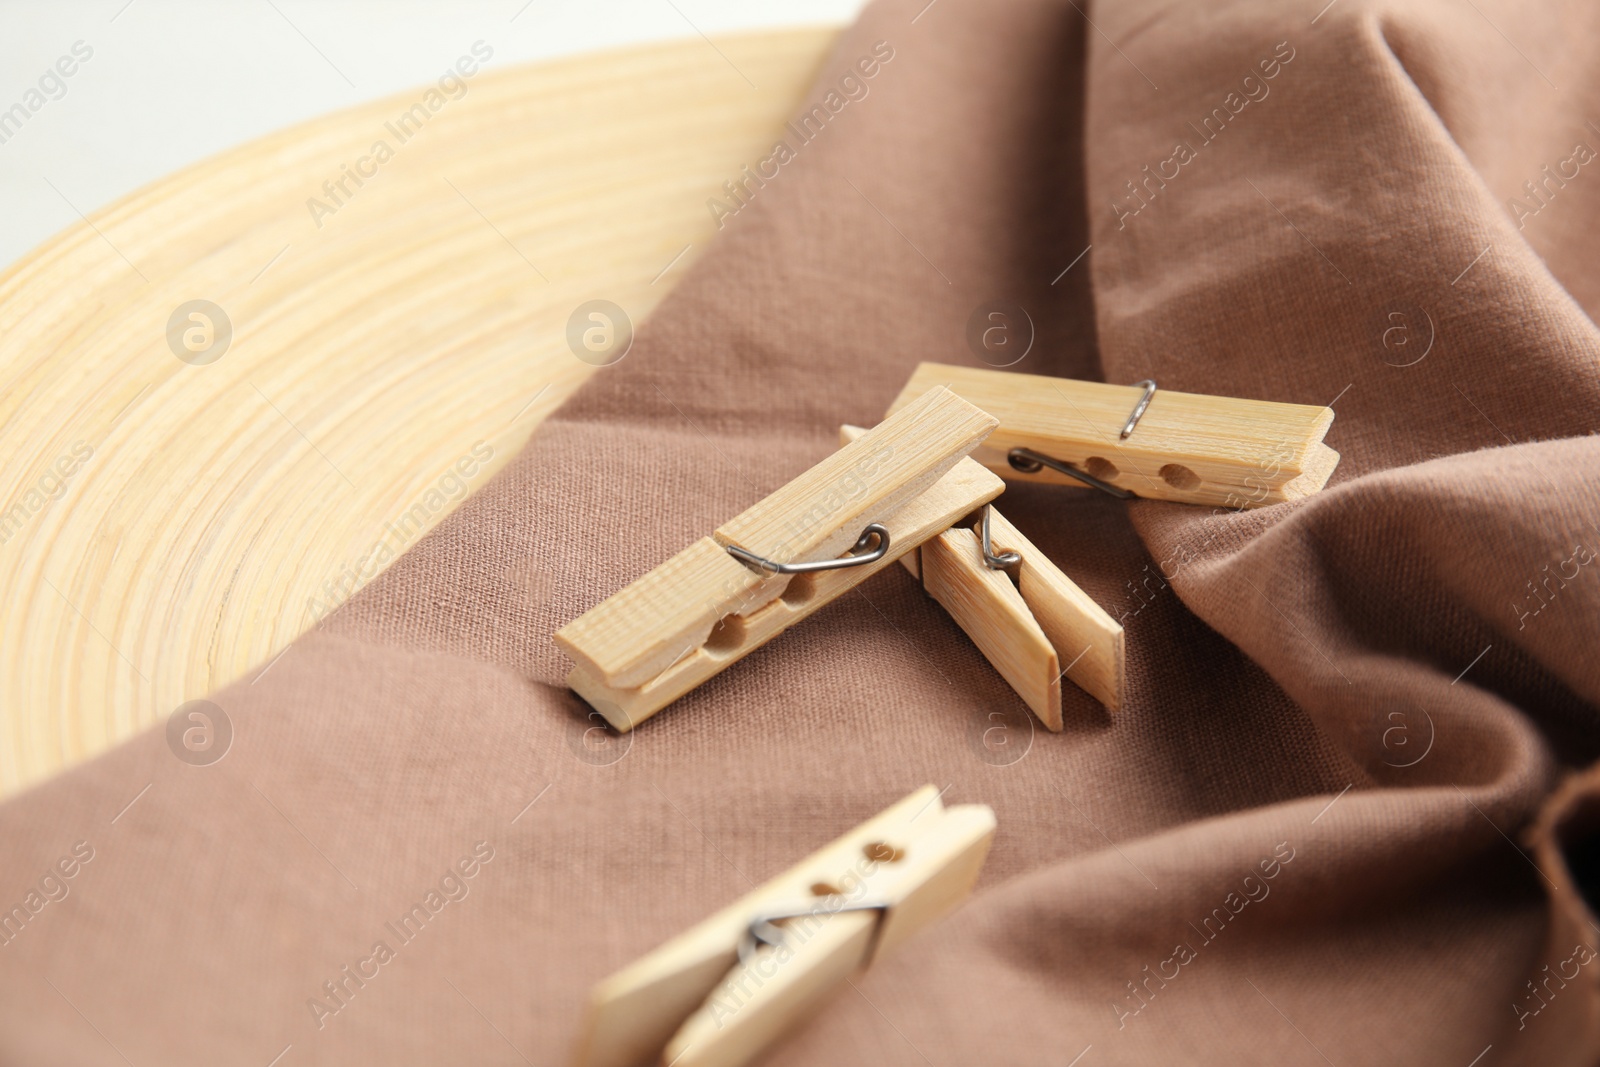 Photo of Many wooden clothespins on brown fabric, closeup view